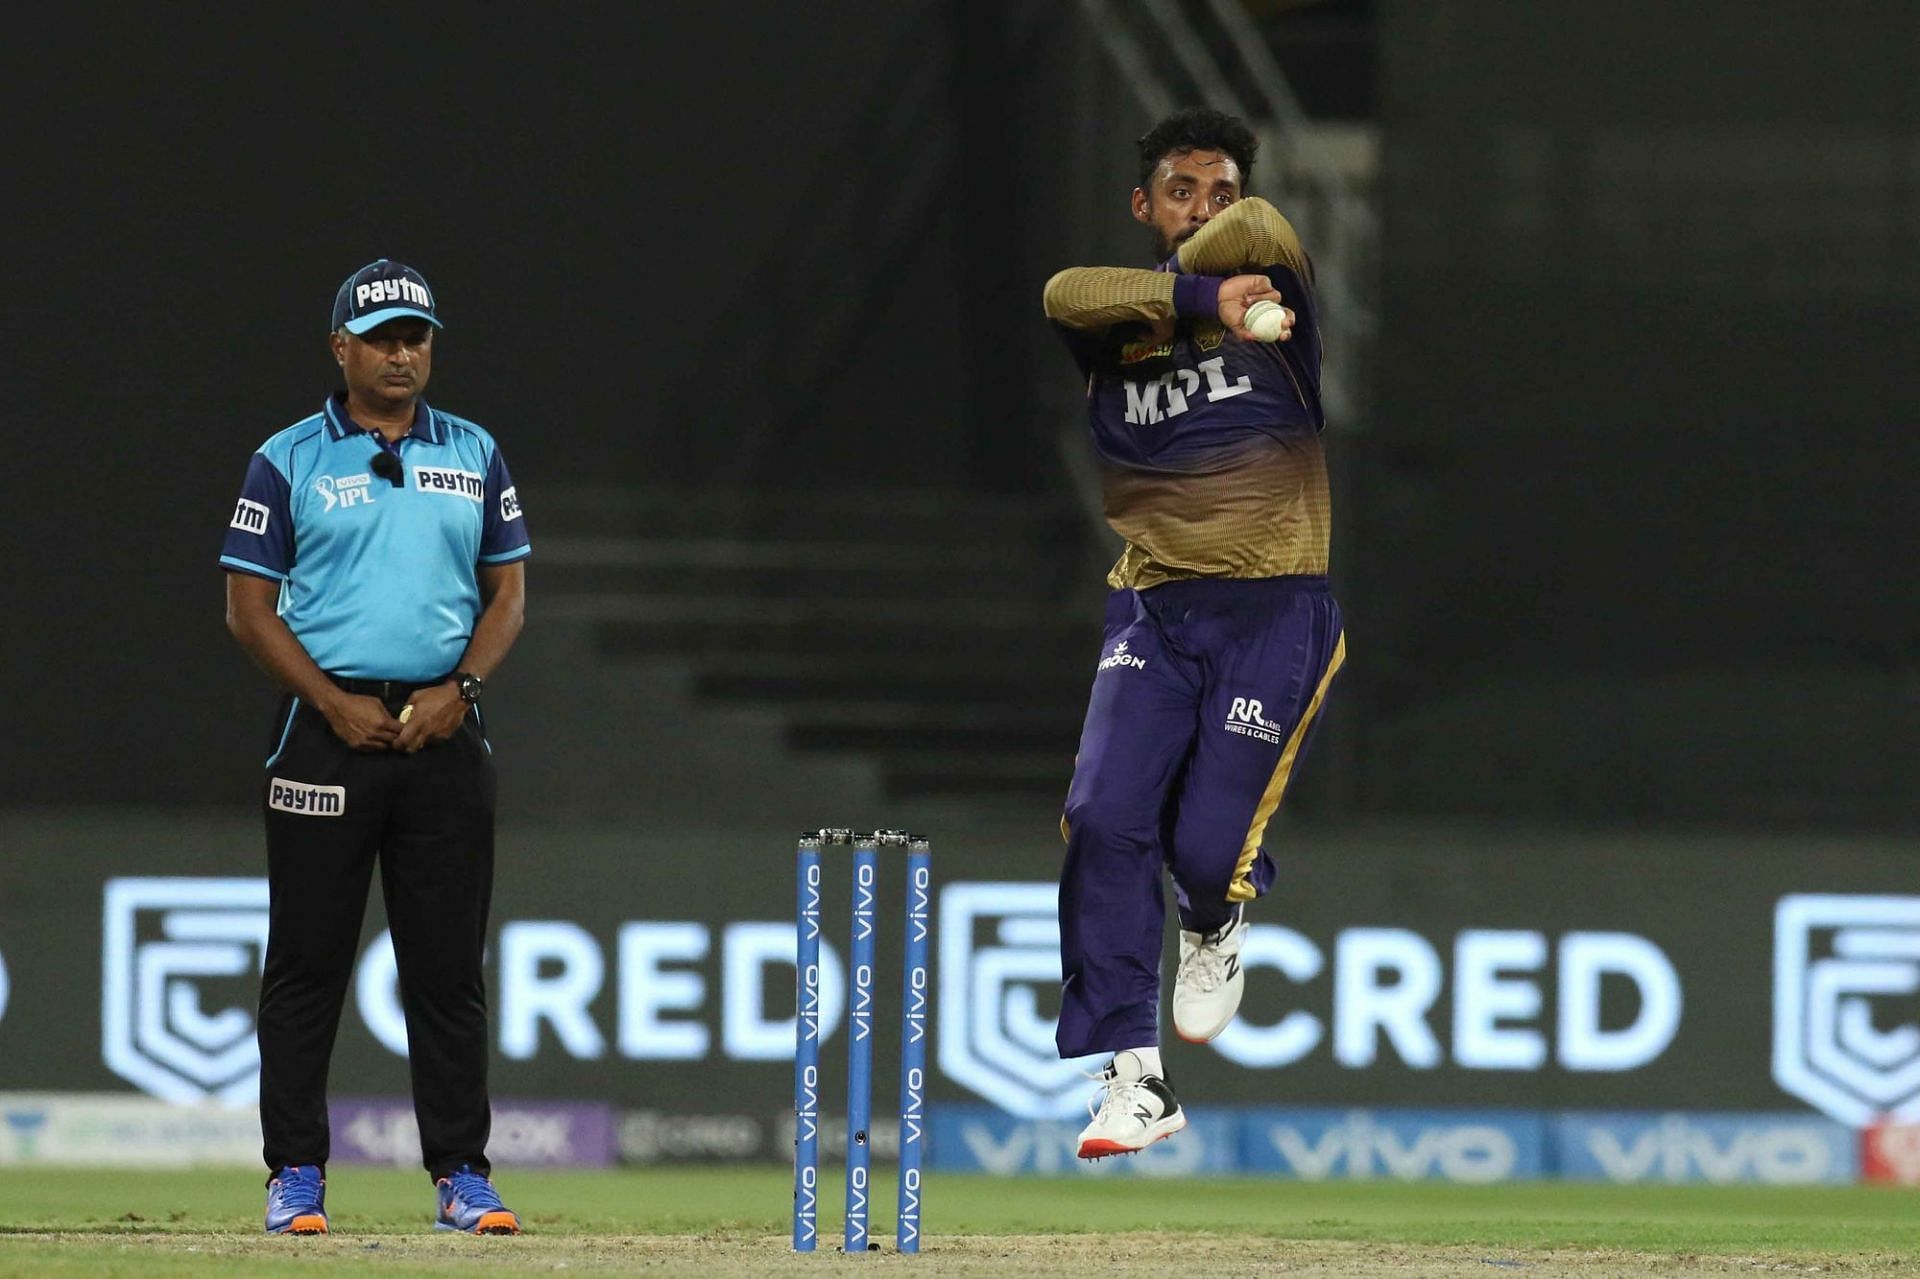 Varun Chakravarthy was the most successful spin bowler in IPL 2021 (Image Courtesy: IPLT20.com)